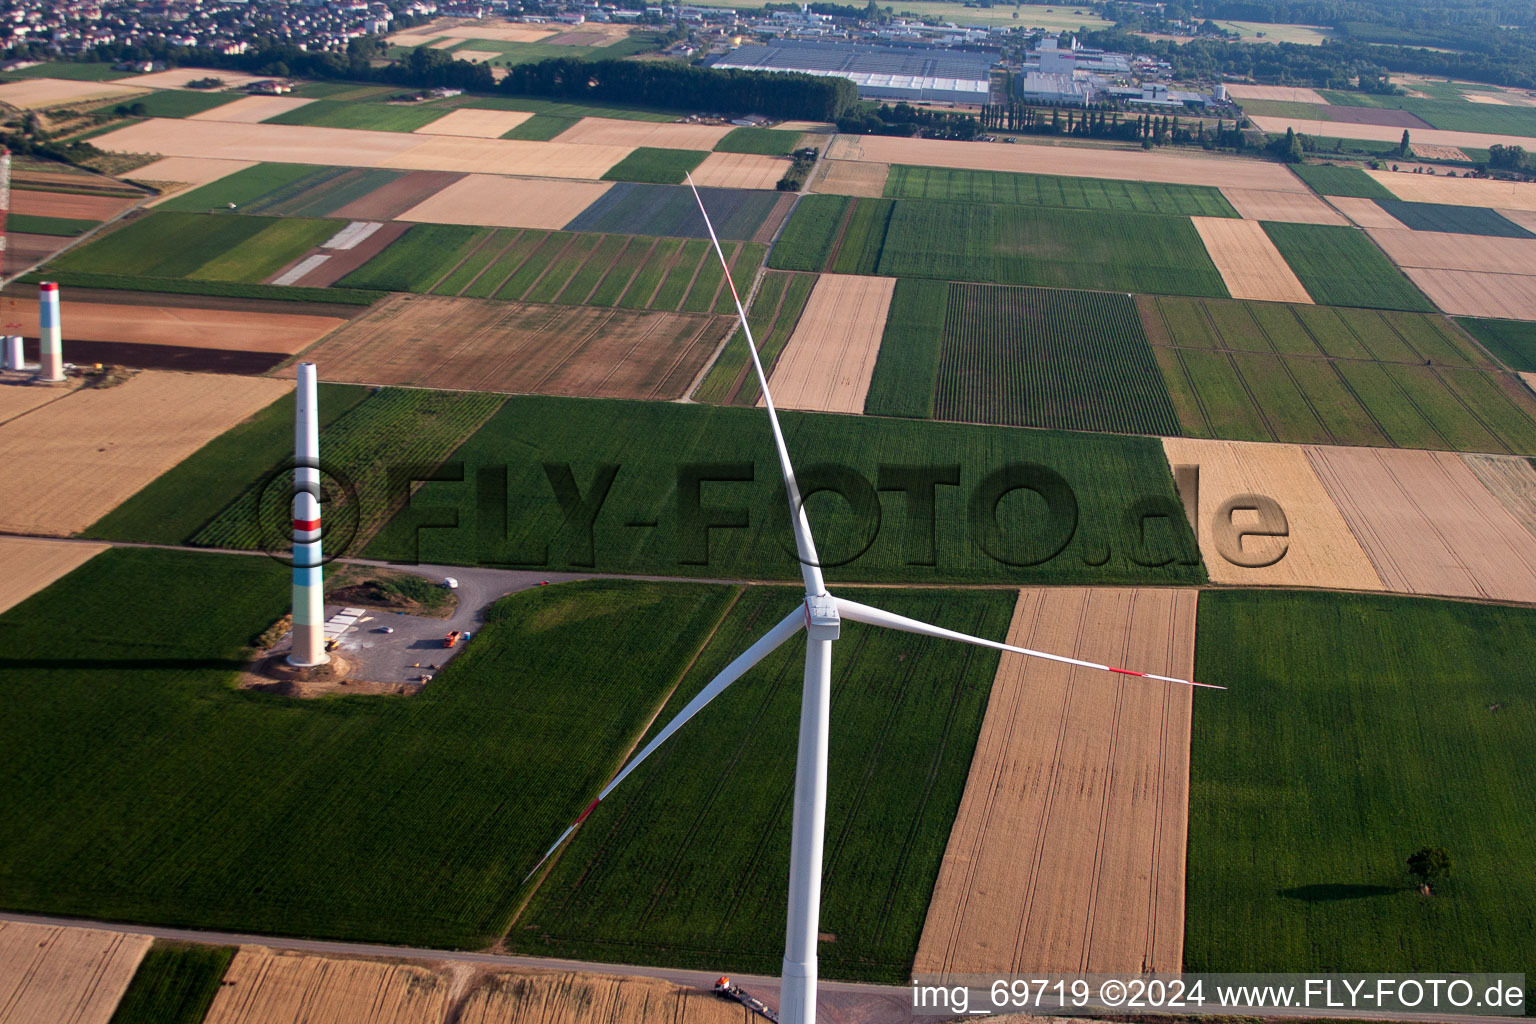 Wind farm construction in Offenbach an der Queich in the state Rhineland-Palatinate, Germany from the plane